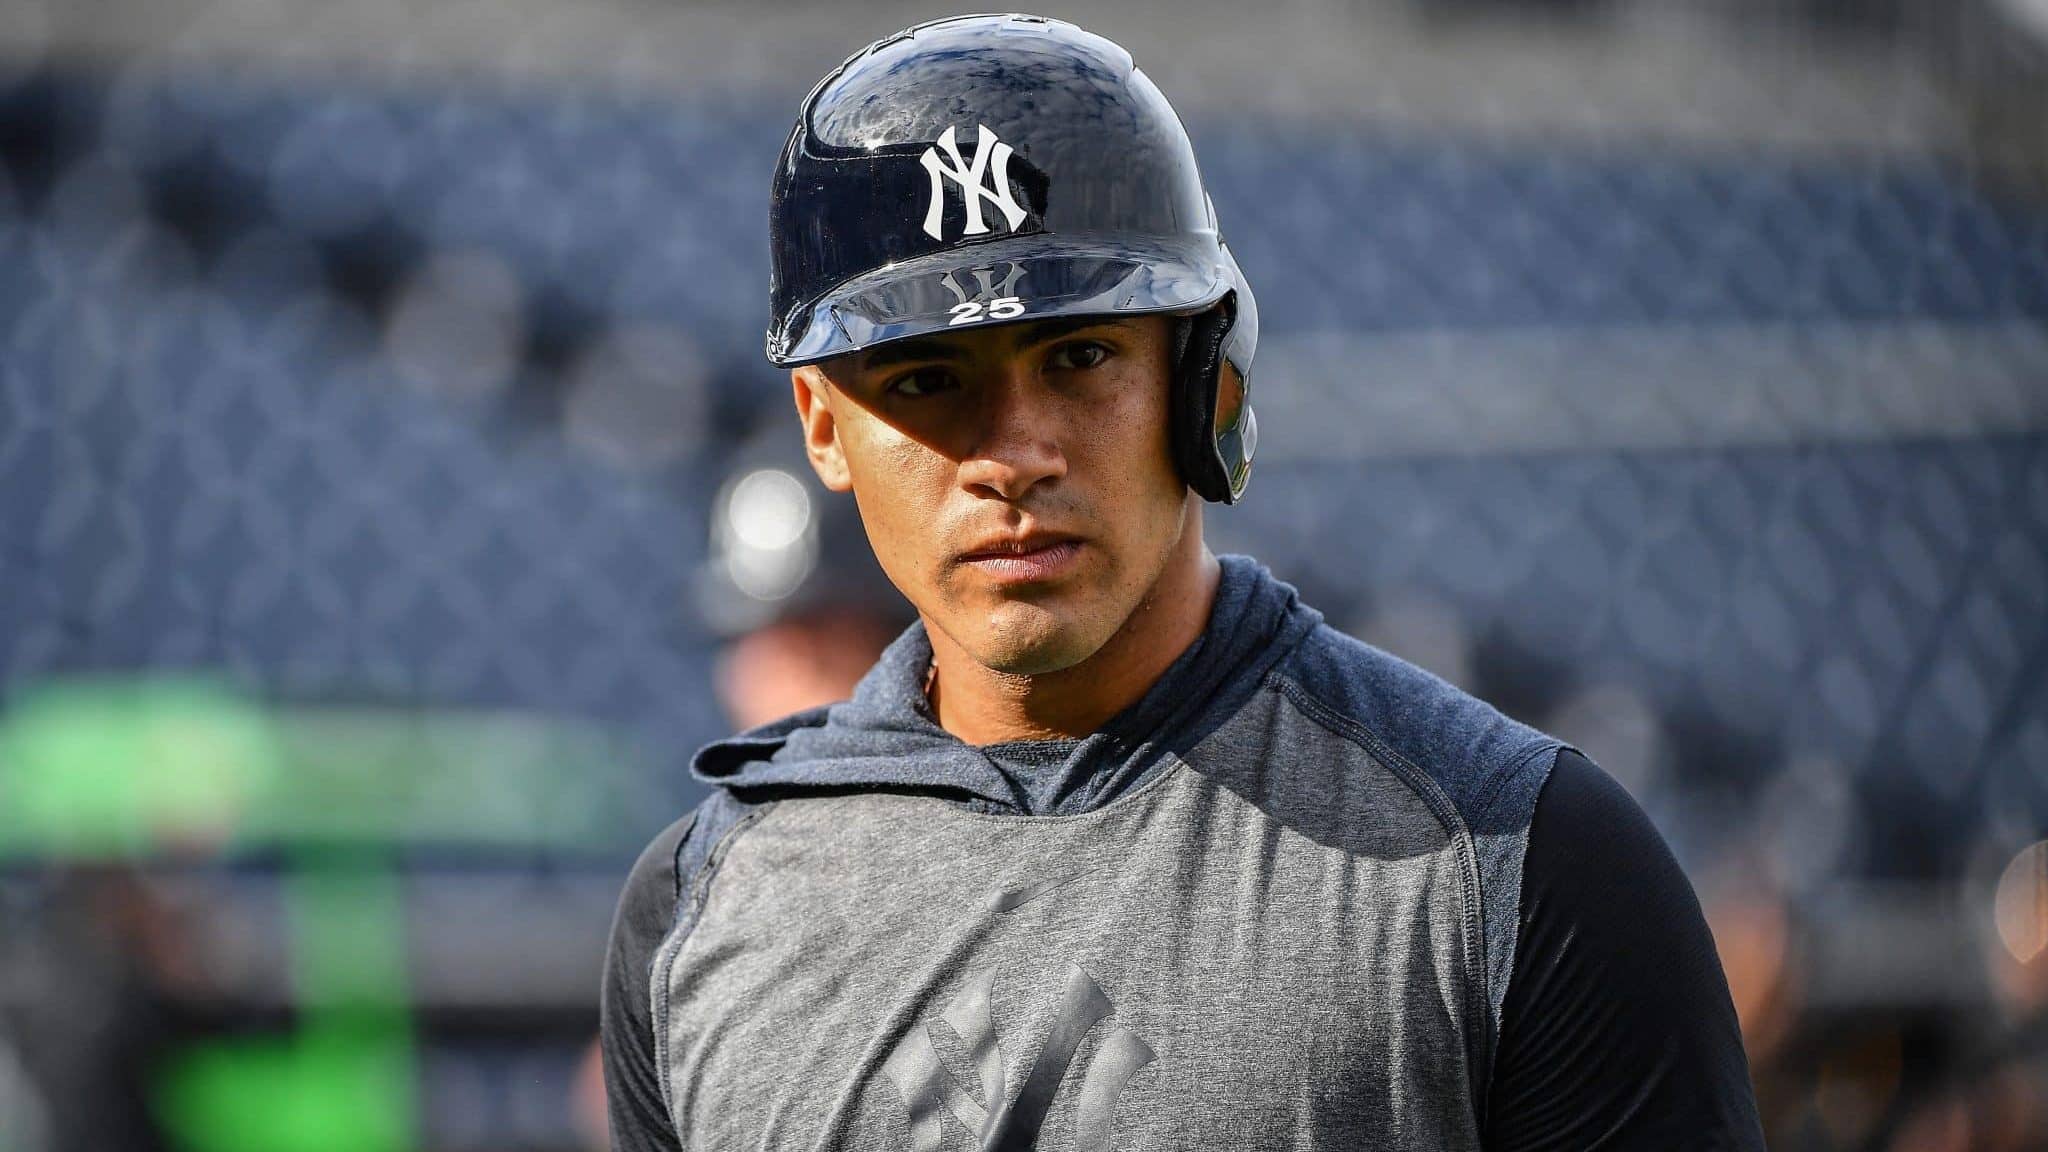 TAMPA, FLORIDA - FEBRUARY 24: Gleyber Torres #25 of the New York Yankees looks on during batting practice before the spring training game against the Pittsburgh Pirates at Steinbrenner Field on February 24, 2020 in Tampa, Florida.